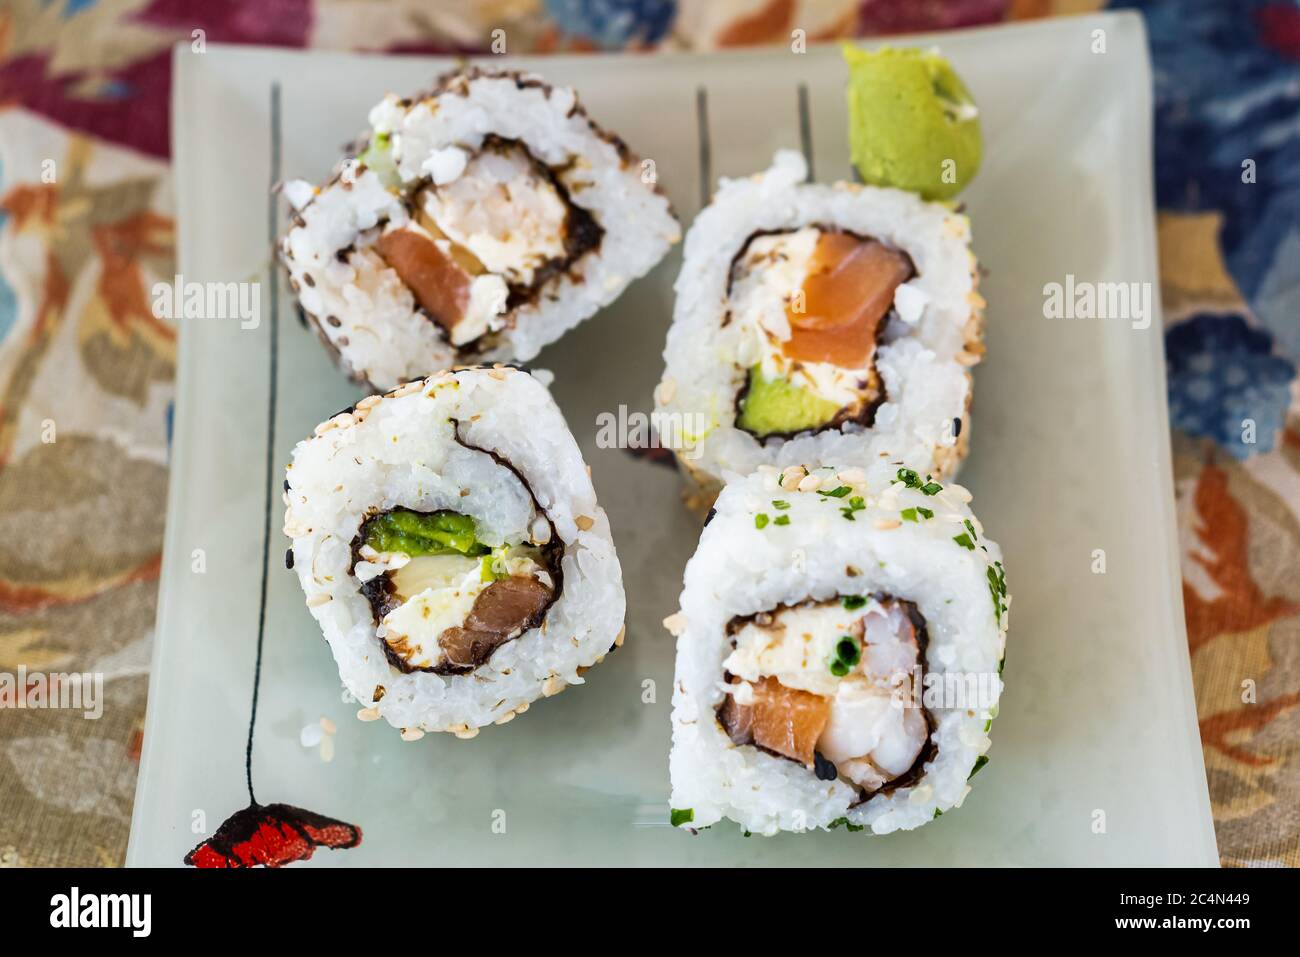 Maki S High Resolution Stock Photography and Images - Alamy